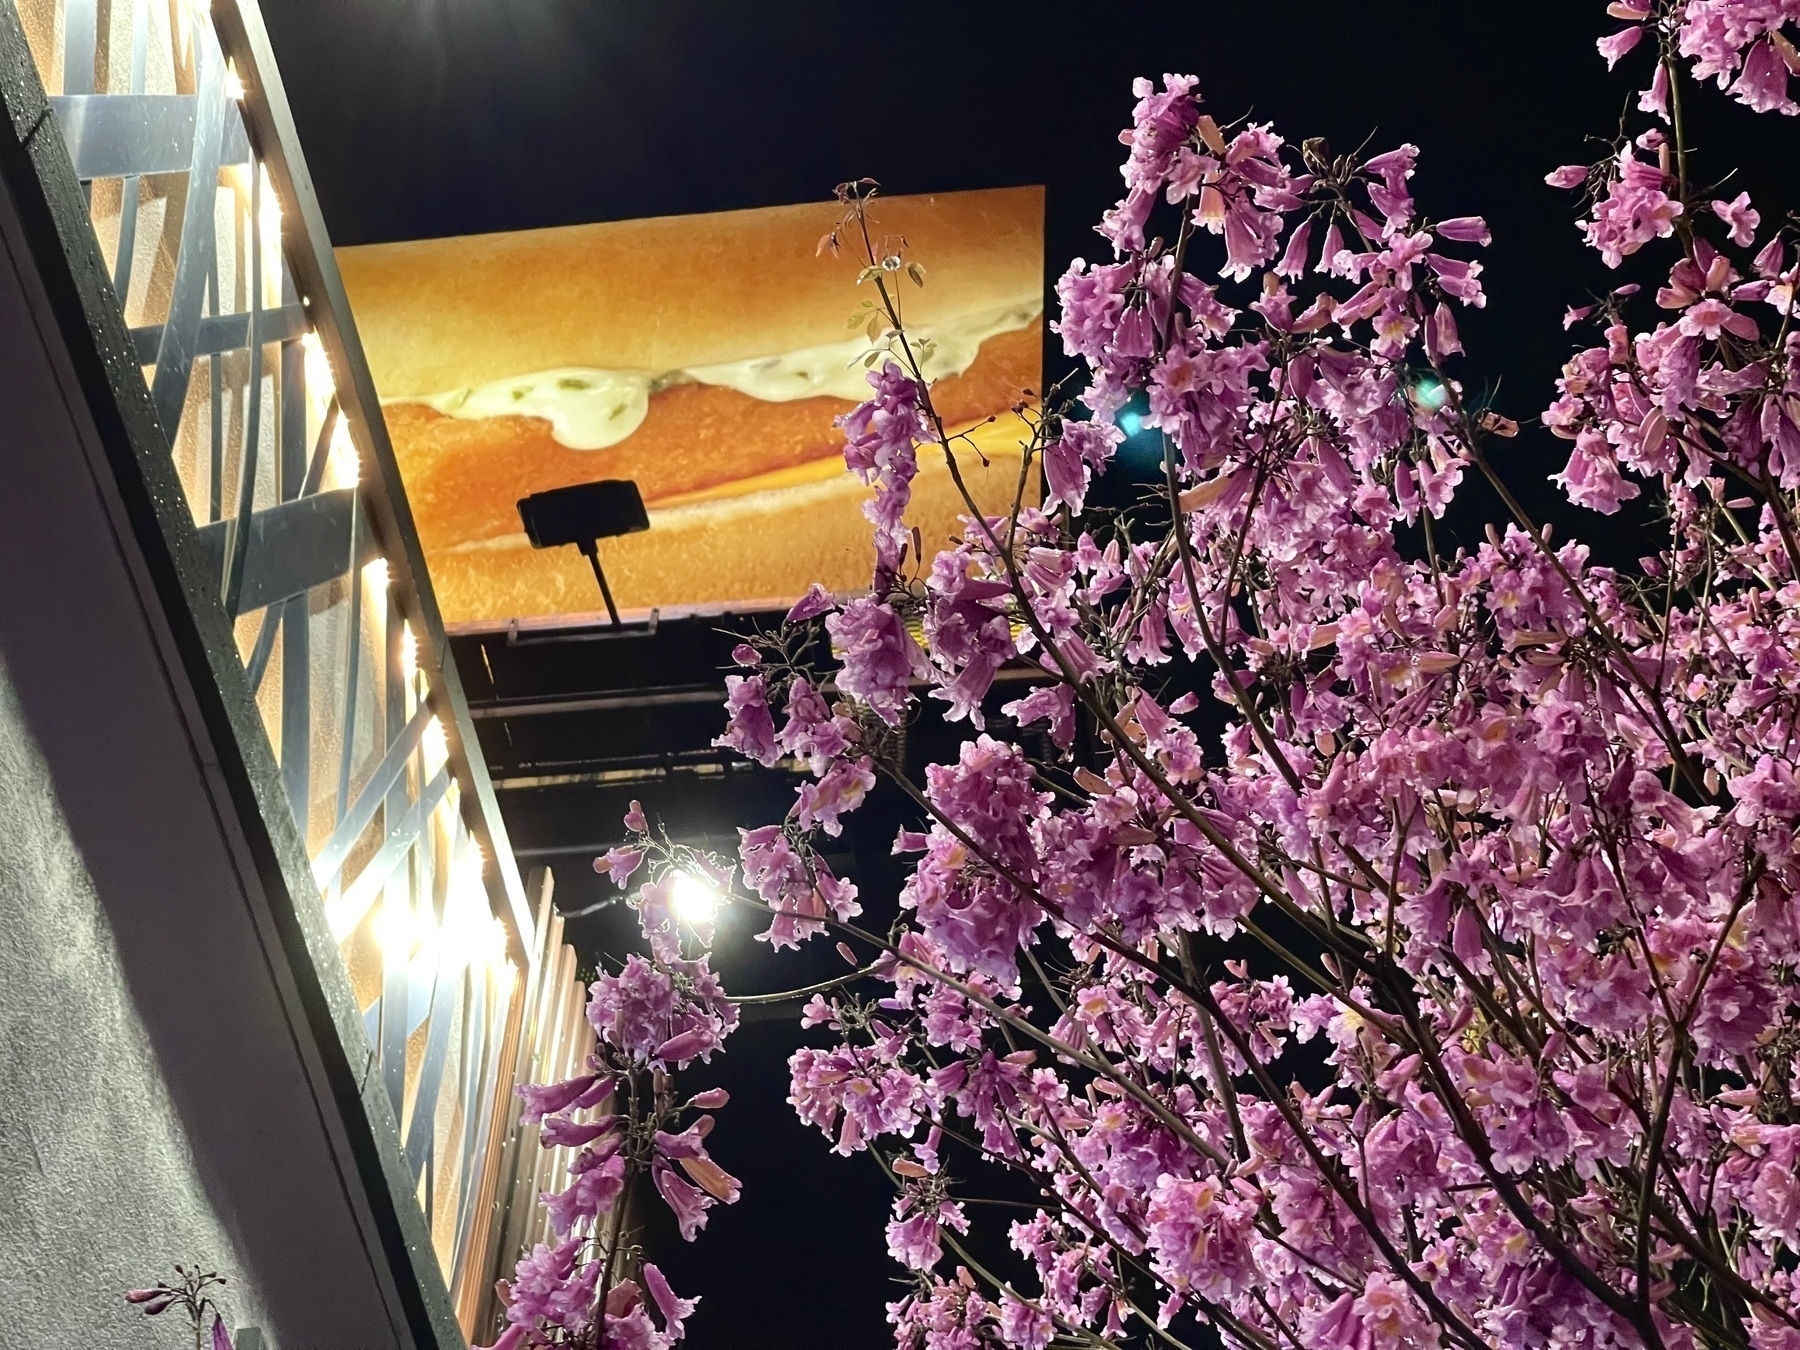 A photo taken at night with a flowering tree in the foreground and a billboard showing a cheeseburger in the background. 